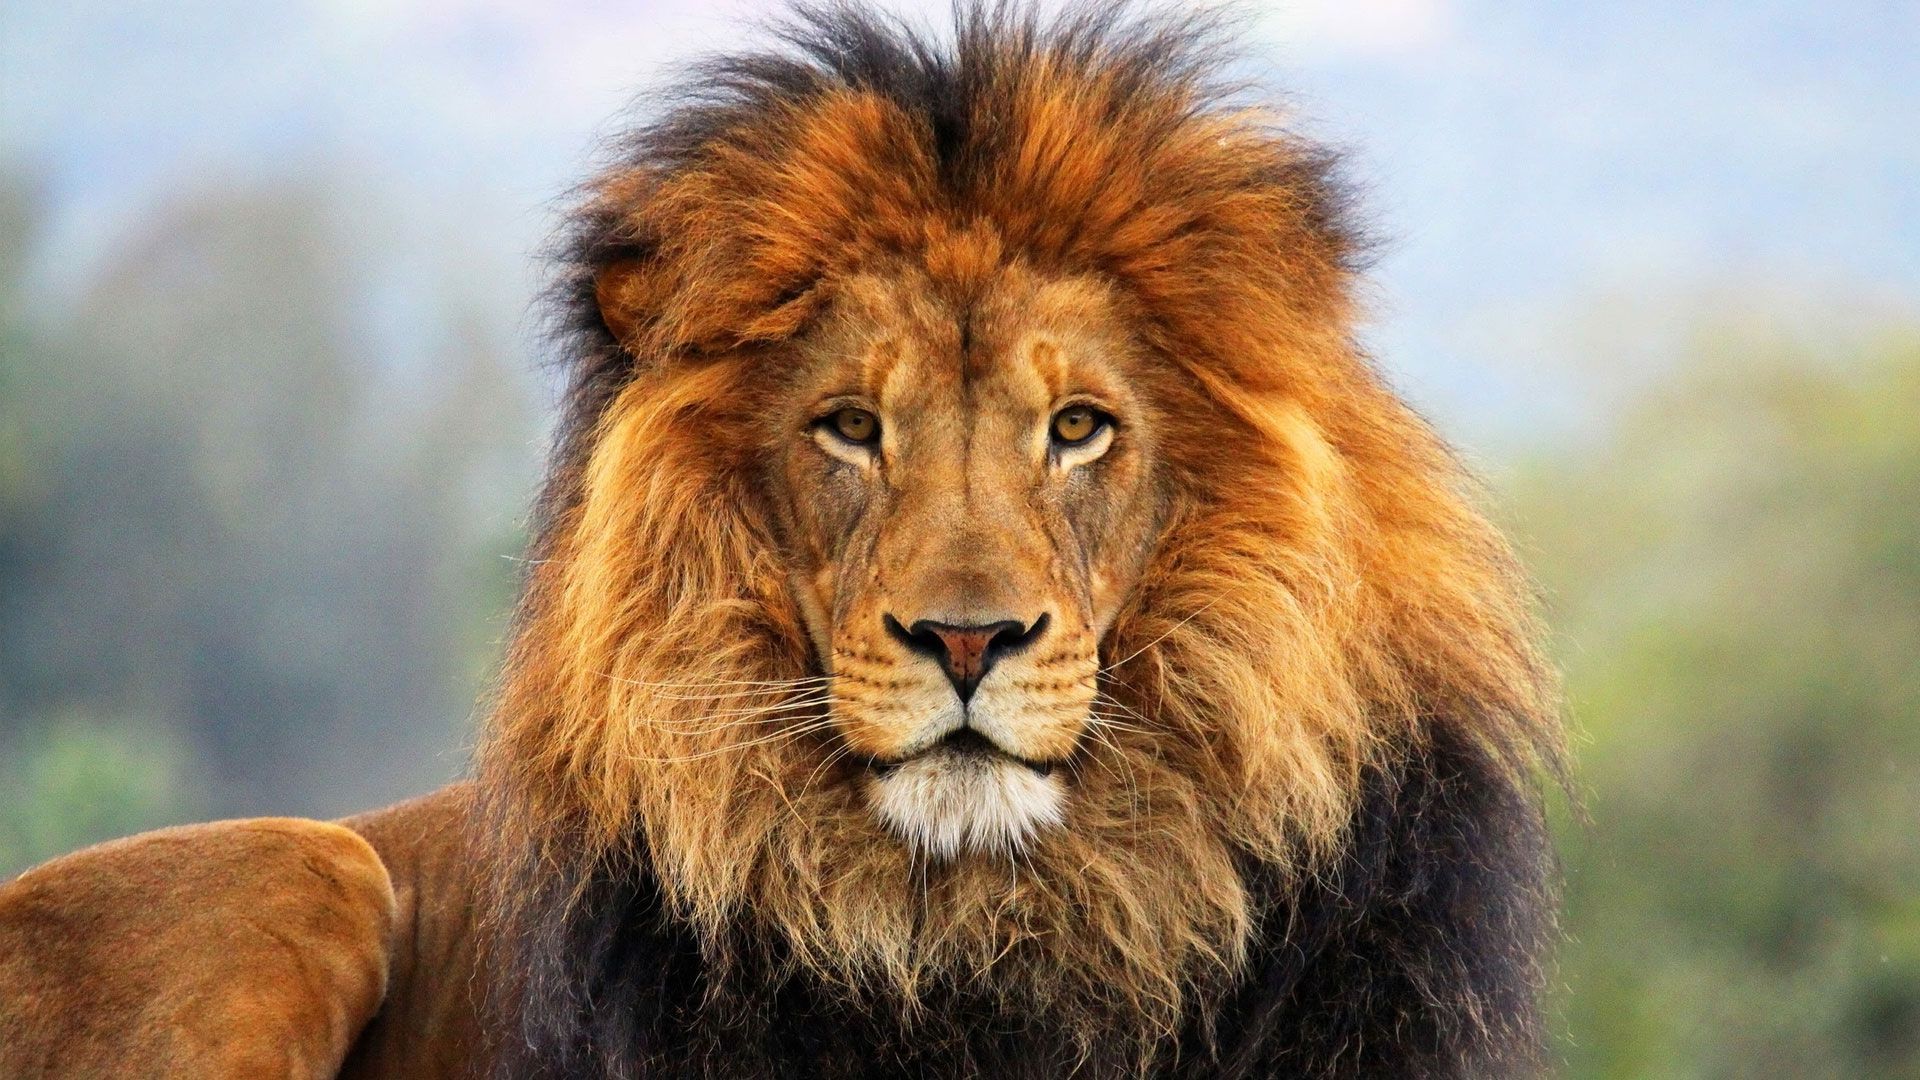 HD Lion Wallpapers 1080p